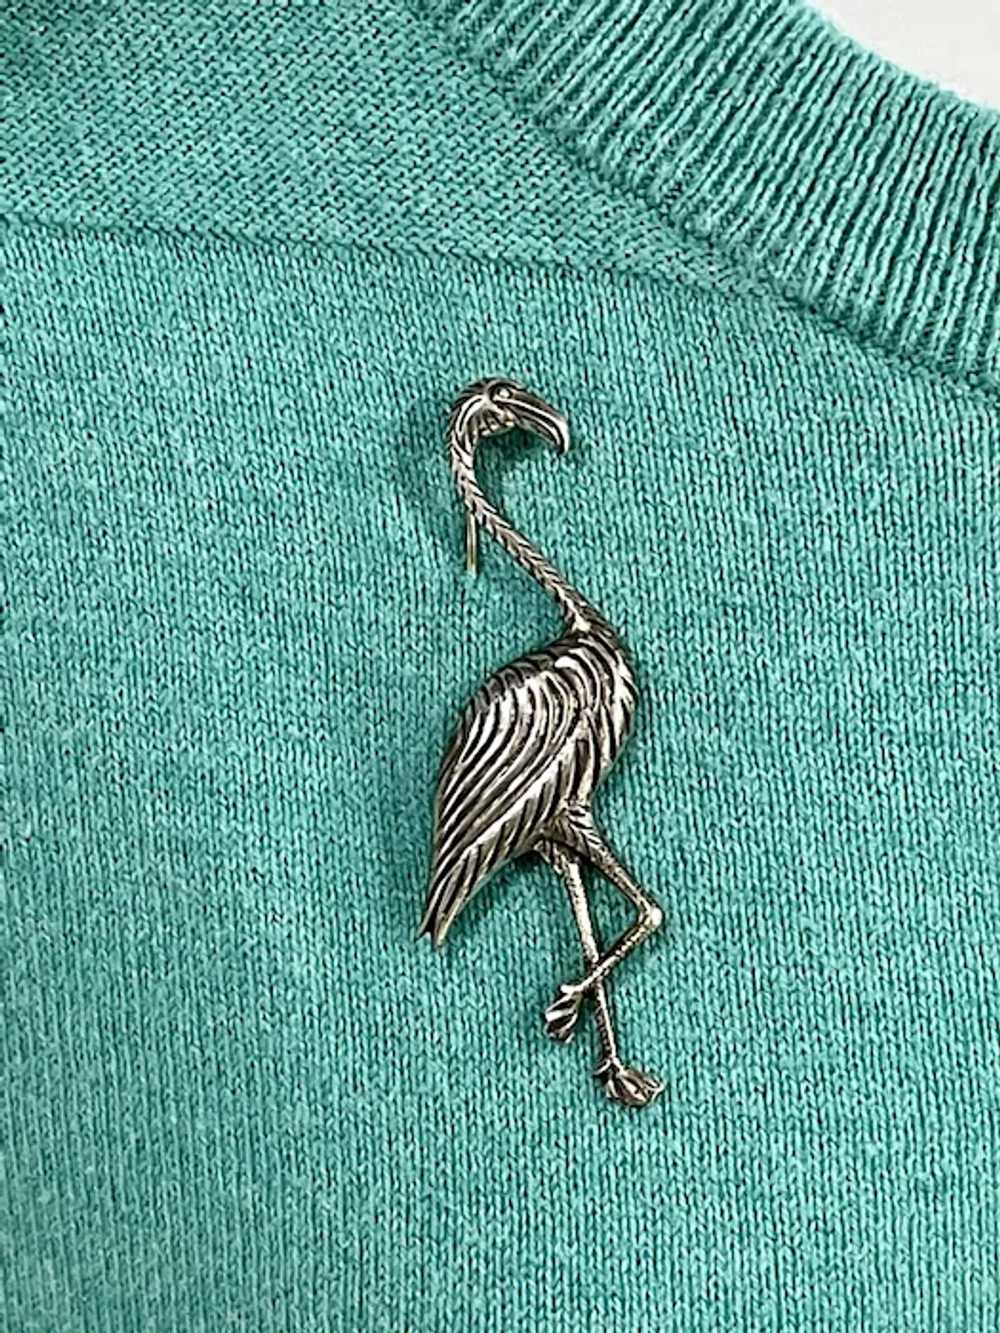 Sterling silver detailed flamingo brooch - image 4